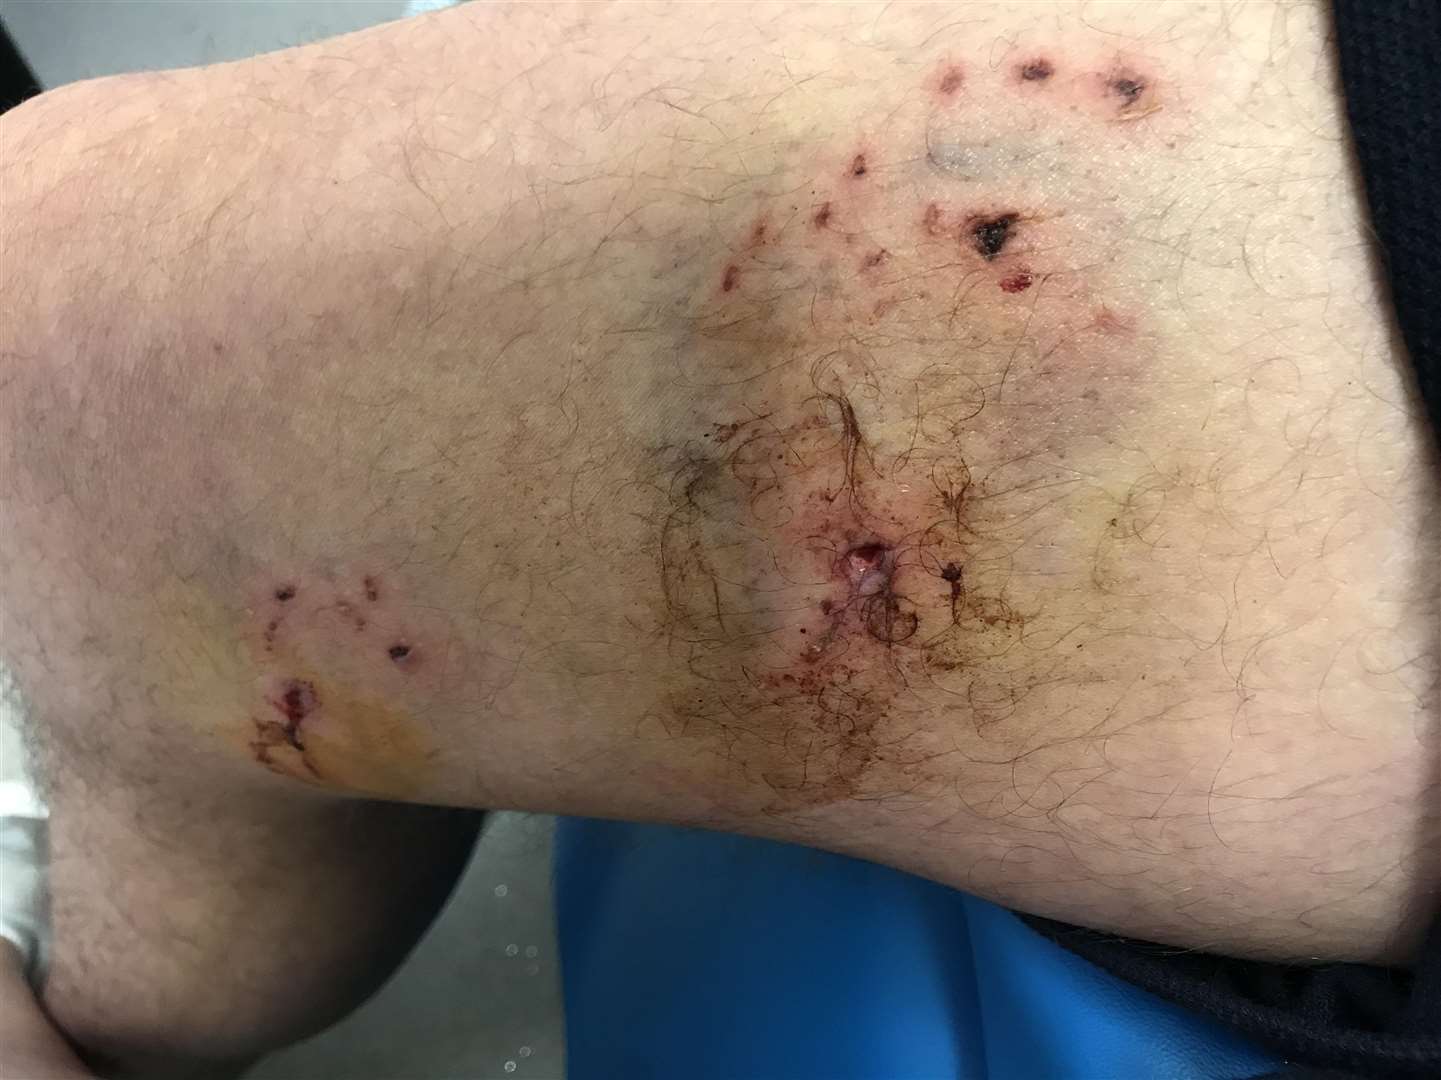 David Turner was bitten on the hand and leg during a vicious attack in Sevenoaks